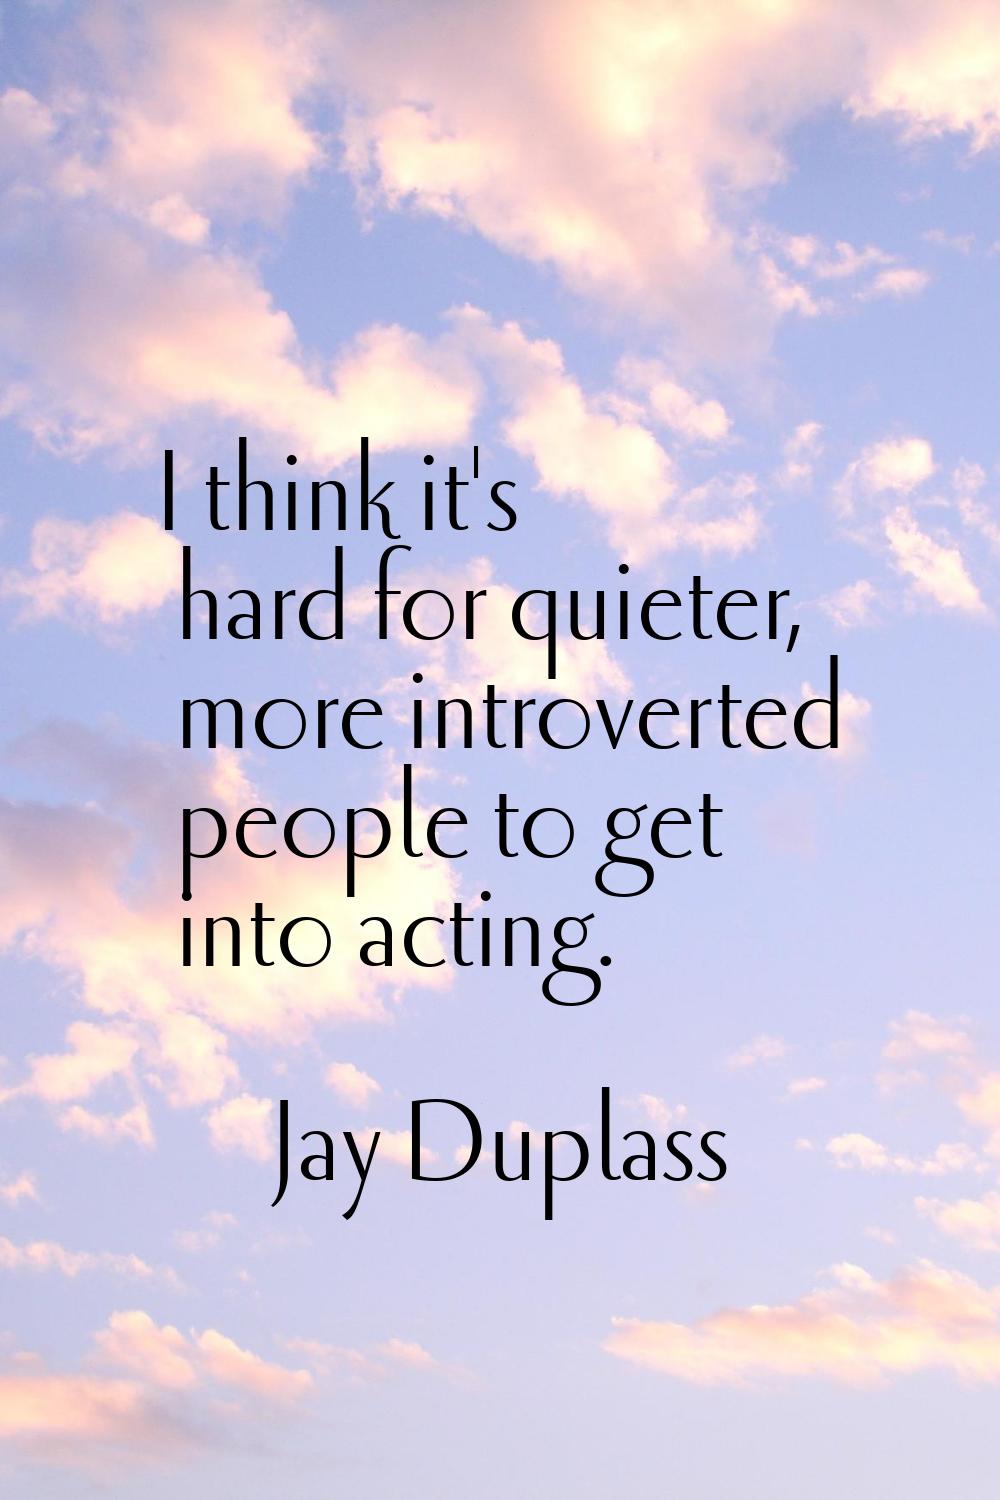 I think it's hard for quieter, more introverted people to get into acting.